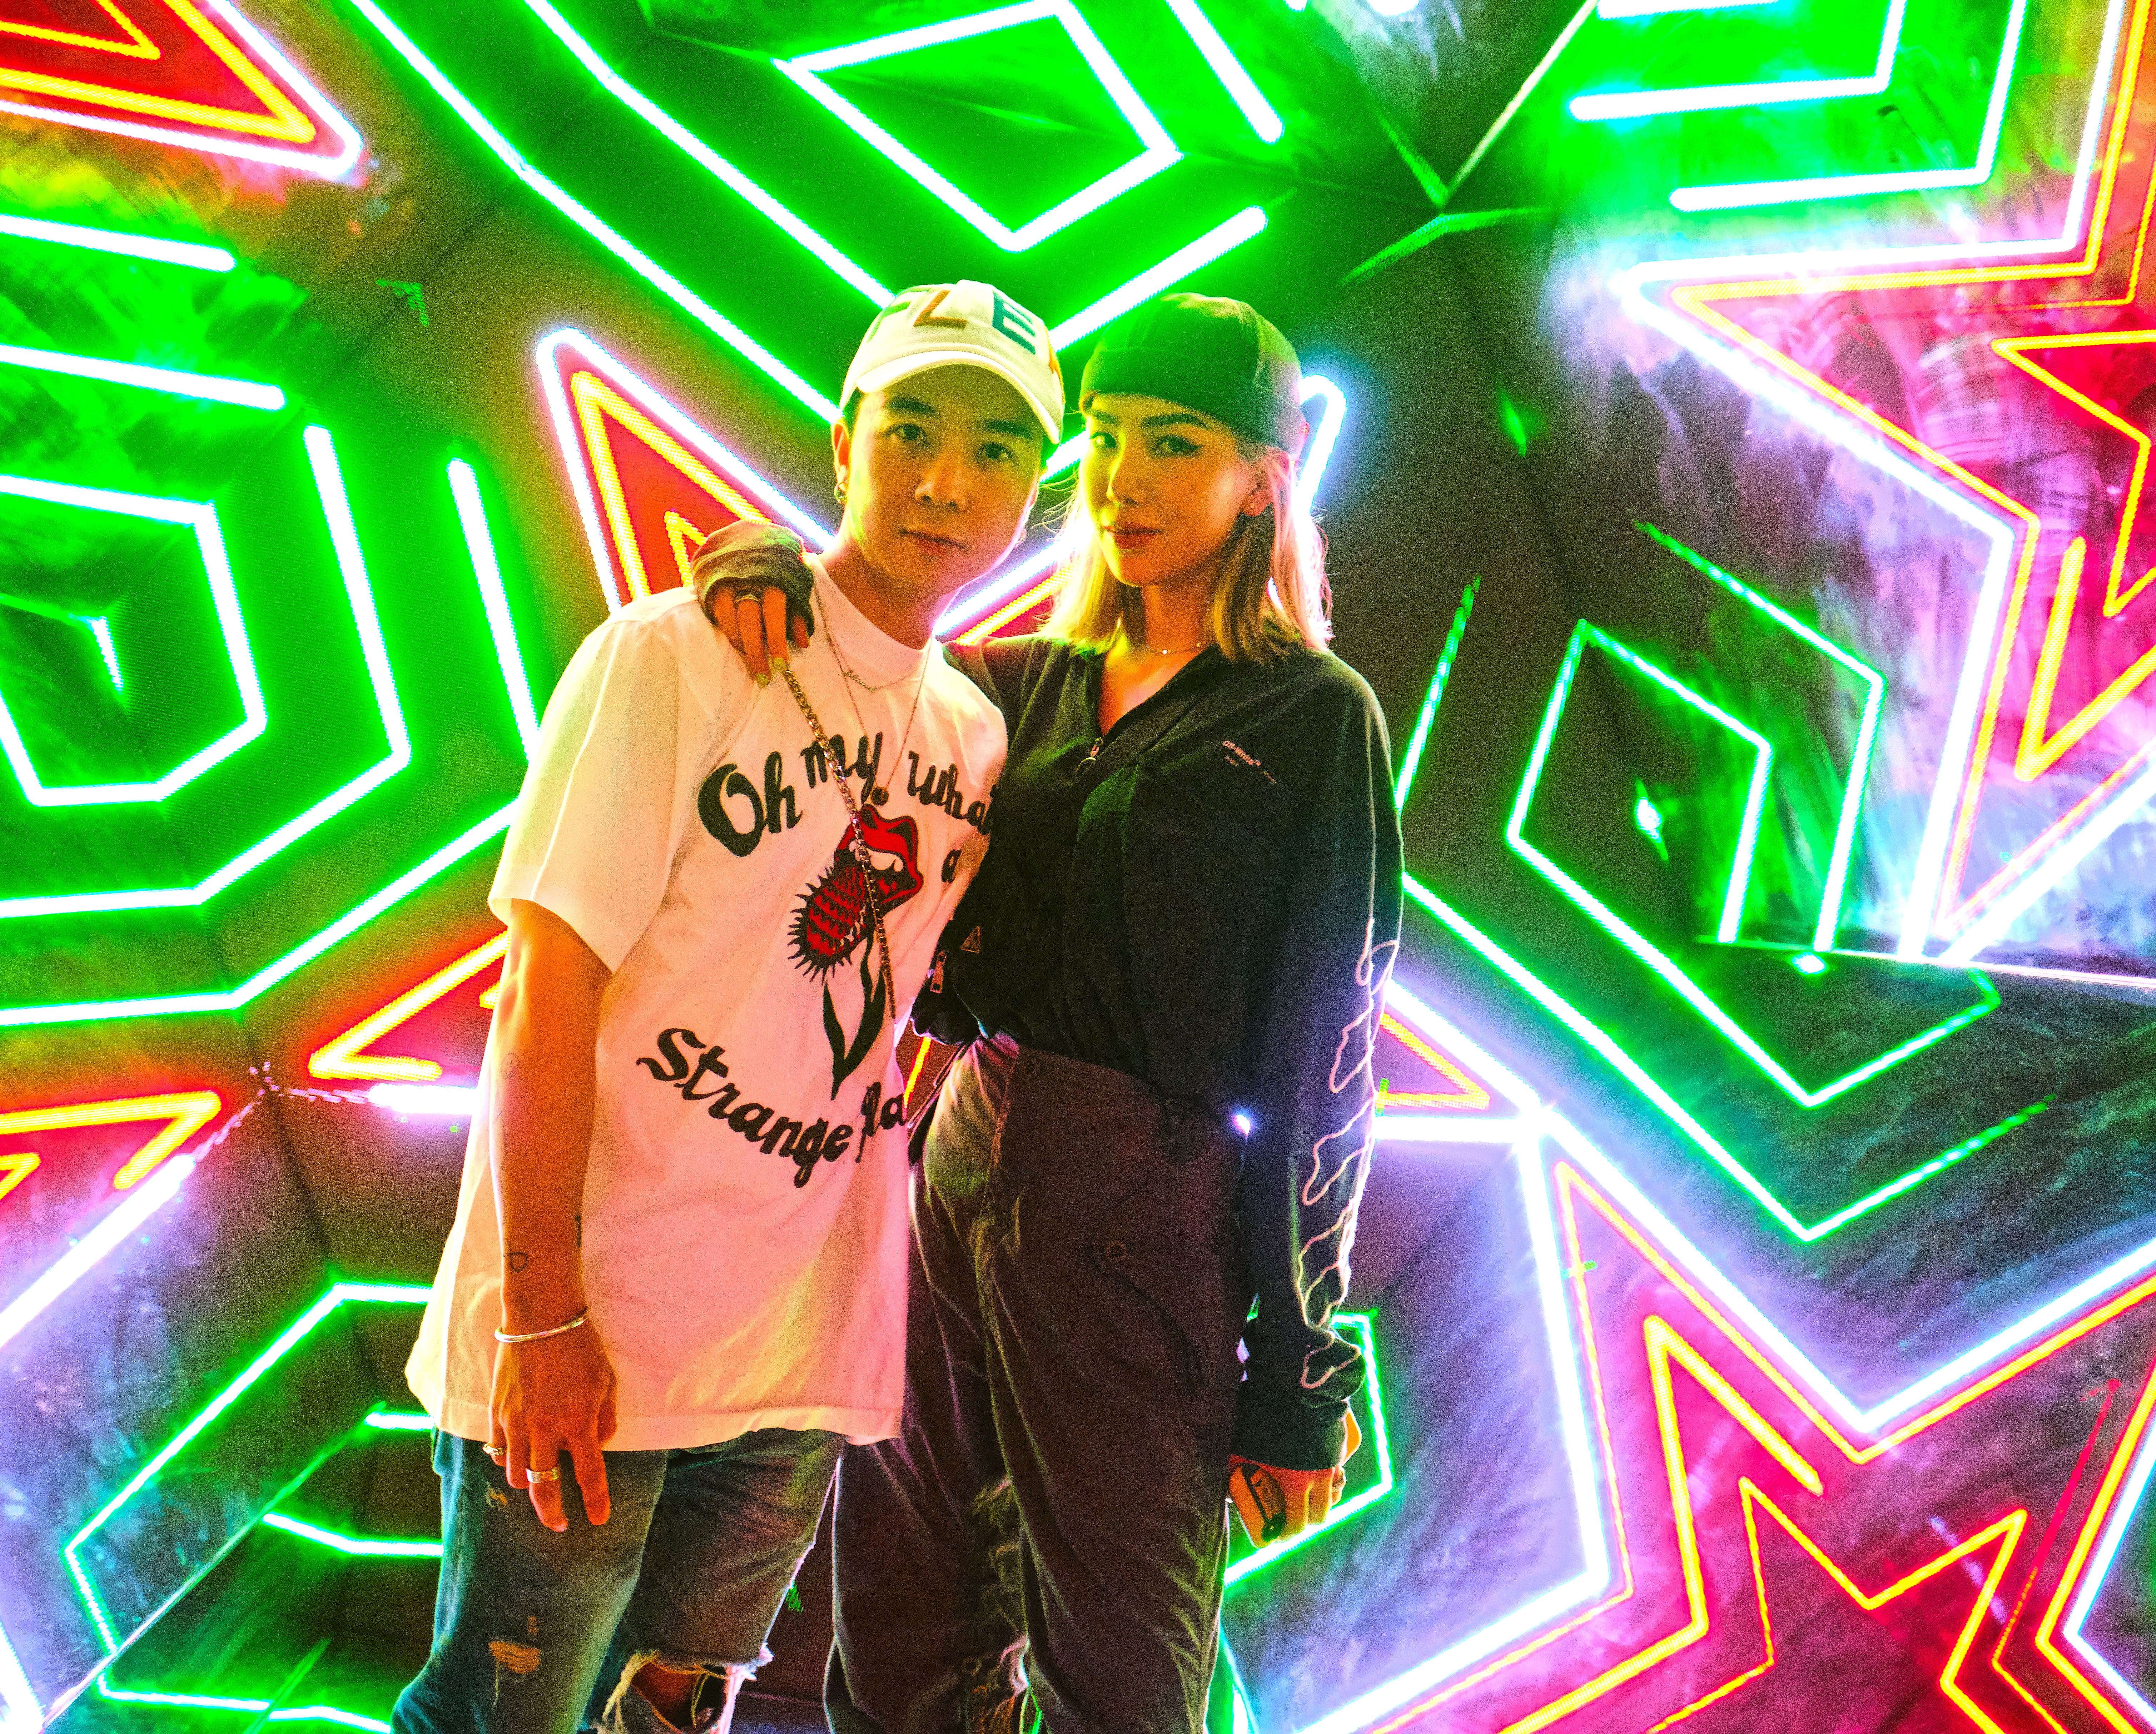 Guests (DJ Blink and Ashley Lau) experiencing the Heineken® kaleidoscope photo booth-v2